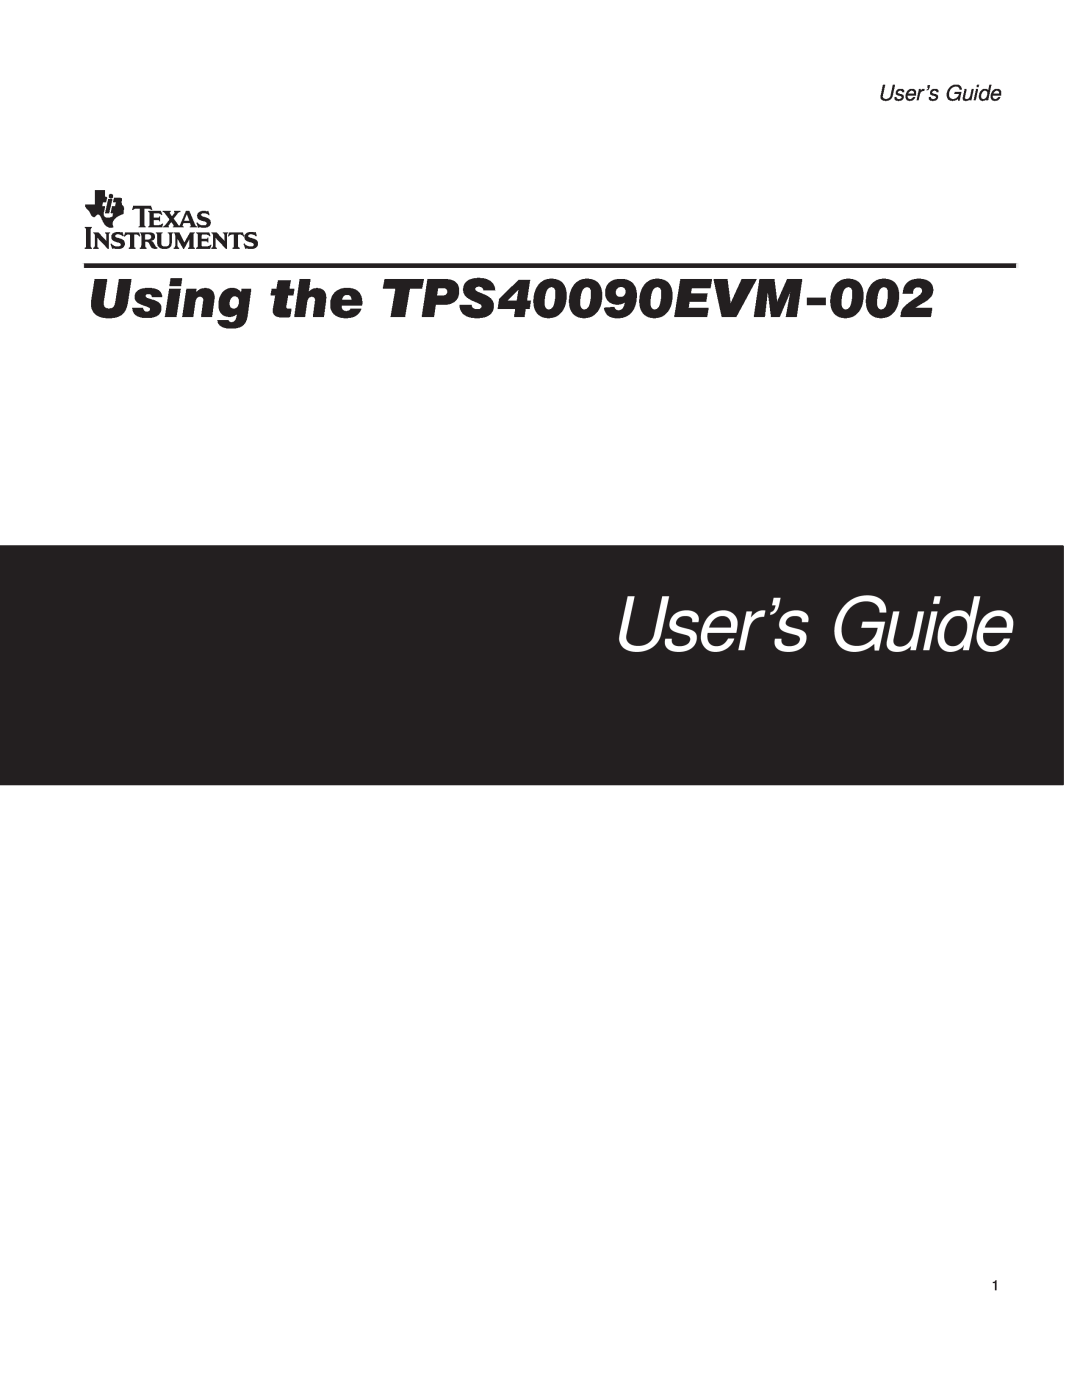 Texas Instruments manual User’s Guide, Using the TPS40090EVM-002 